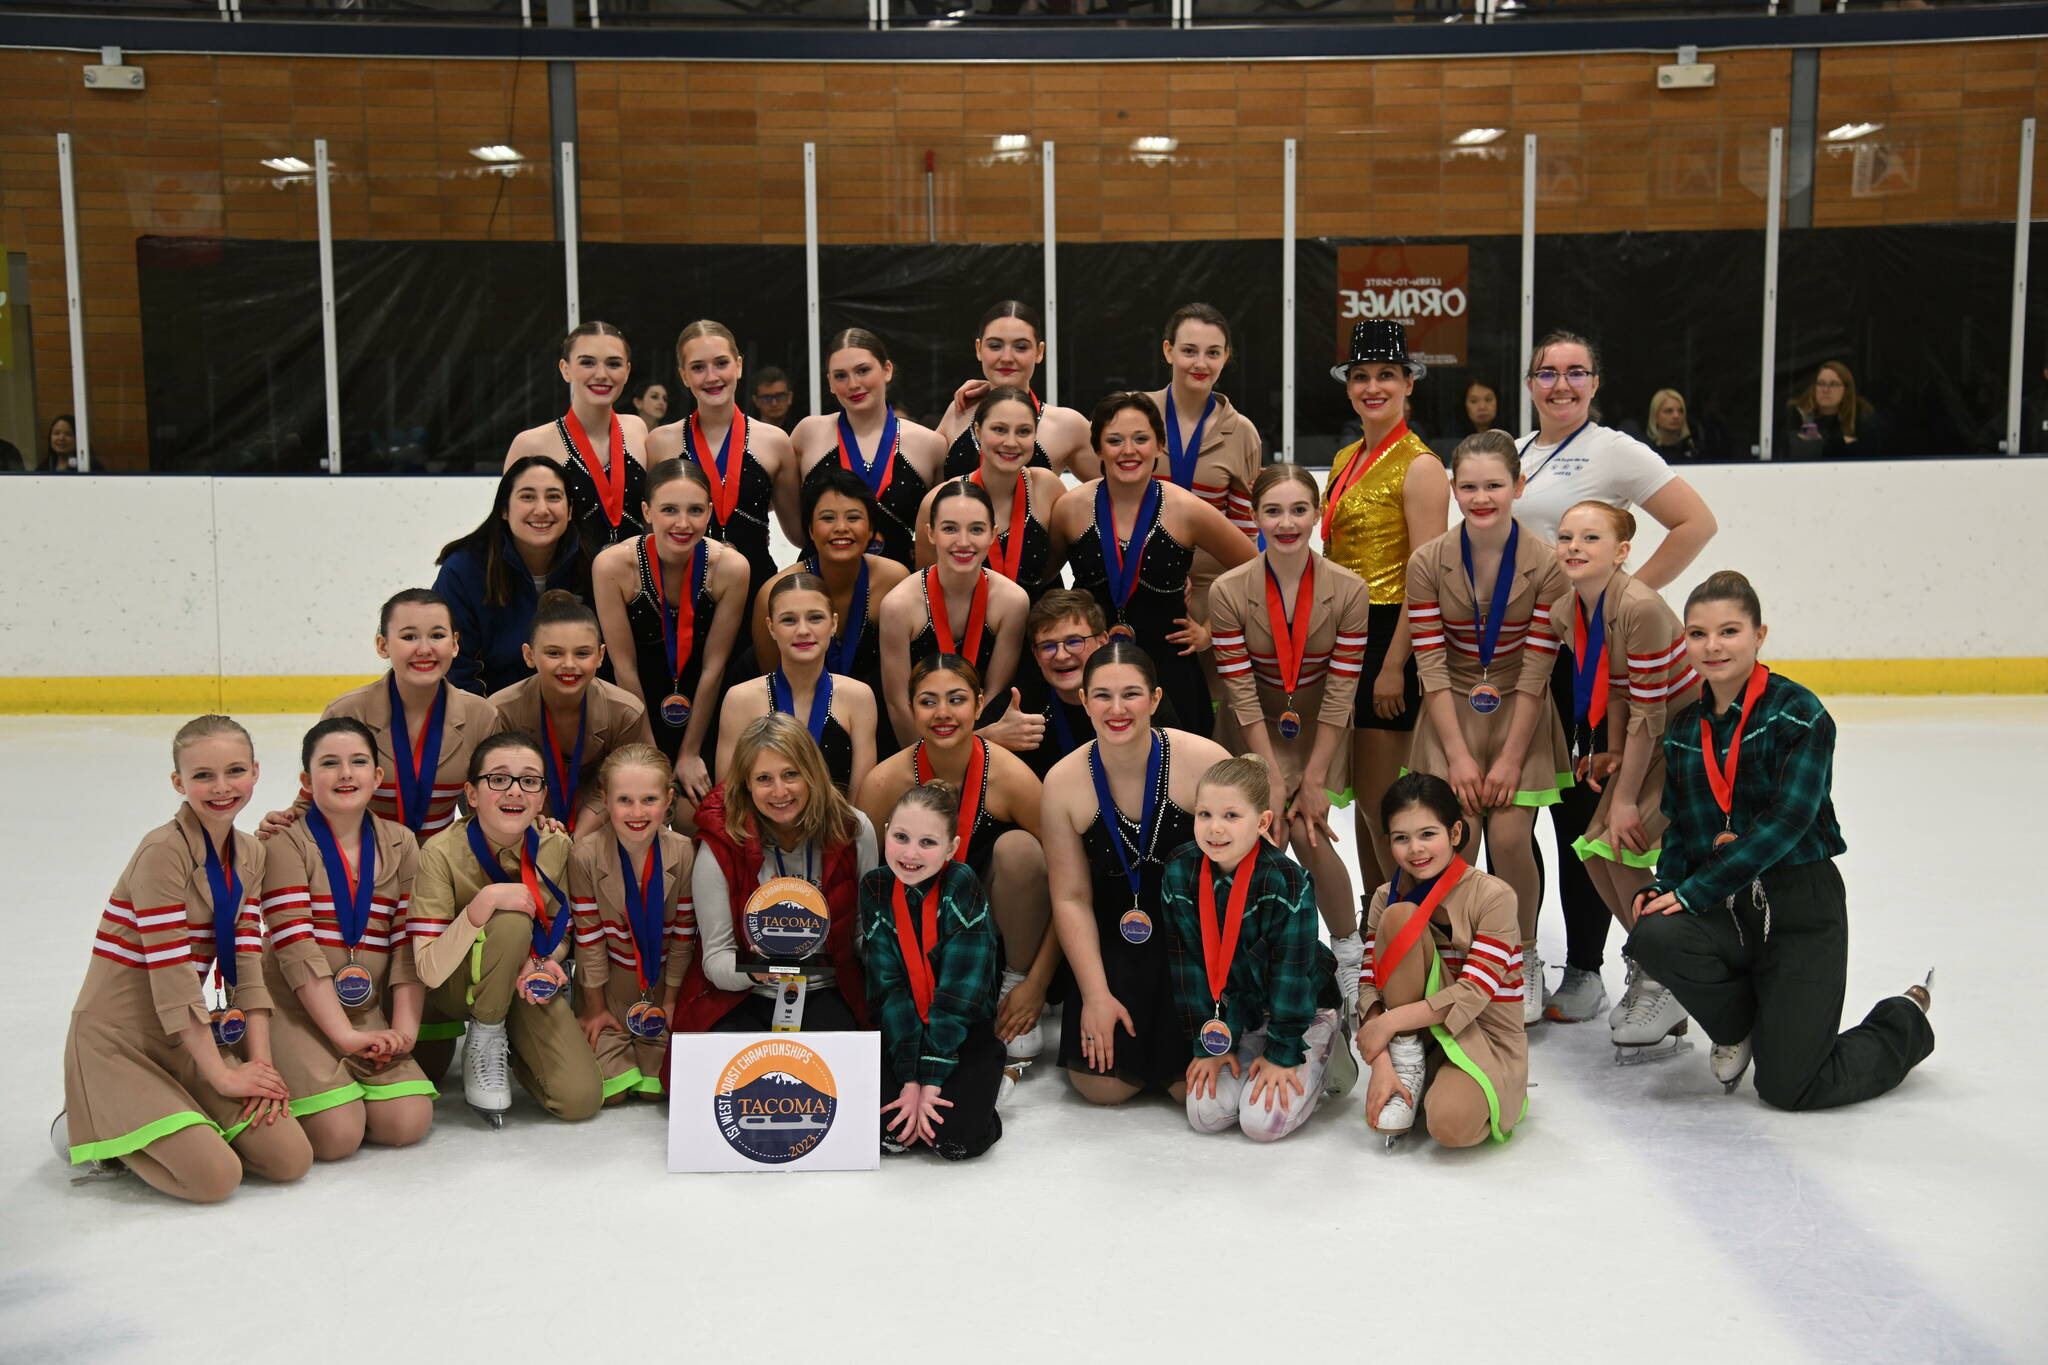 The Juneau Skating Club poses for a group photo after taking third place overall in the 2023 Ice Sports Industry West Coast Championship in Tacoma, Washington at the end of April. (Courtesy Photo / Marianne Oelund)